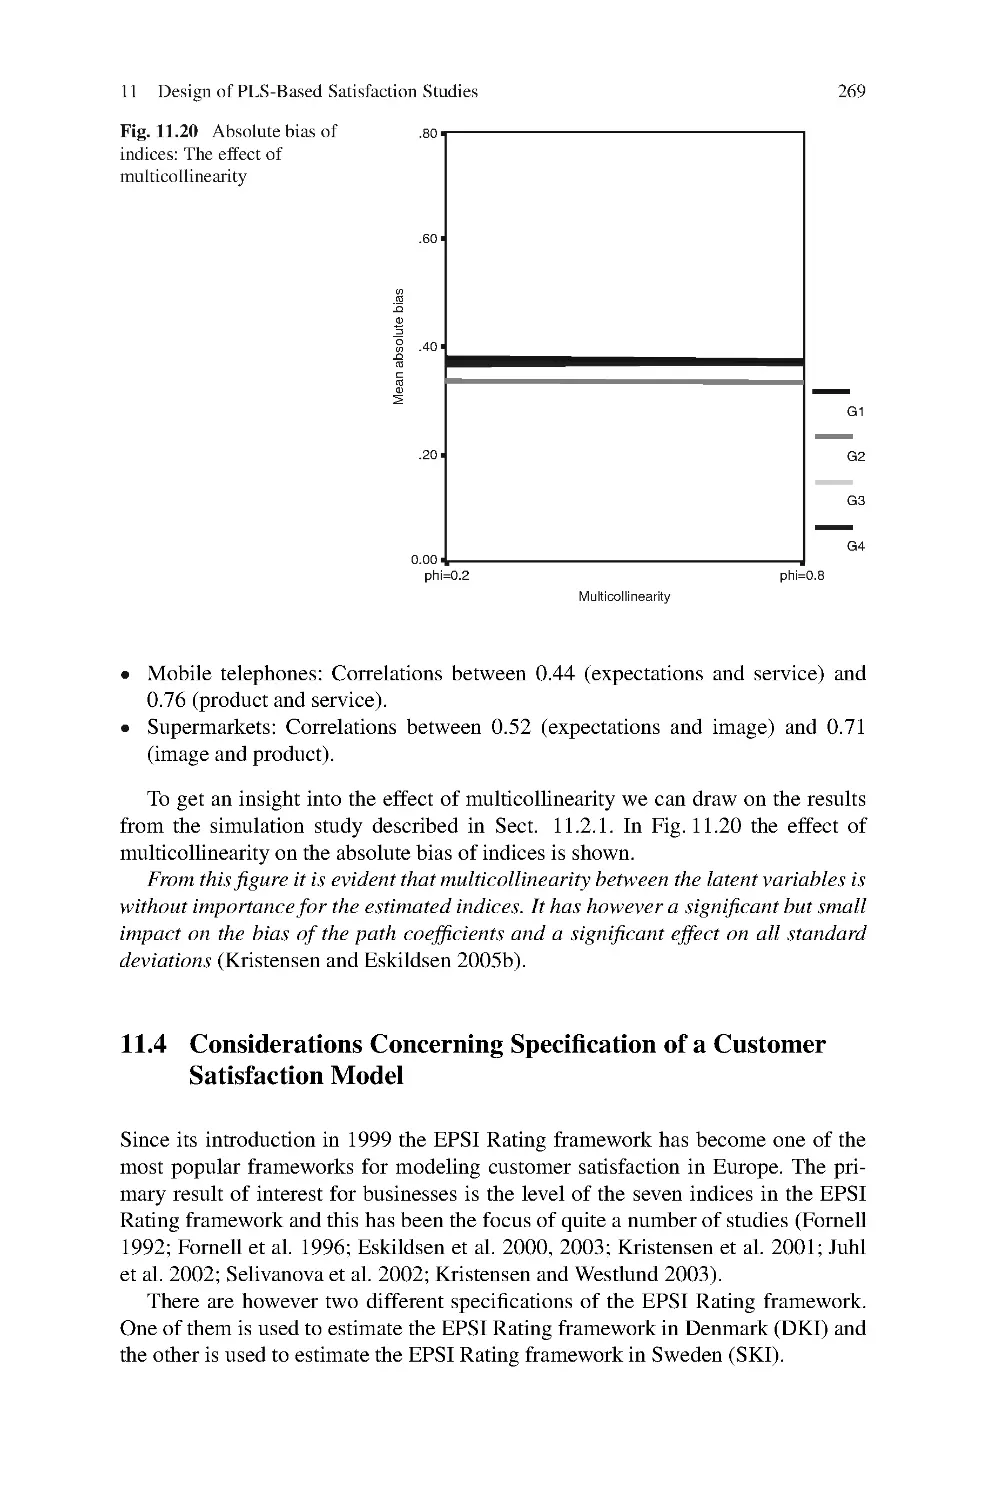 11.4 Considerations Concerning Specification of a Customer Satisfaction Model